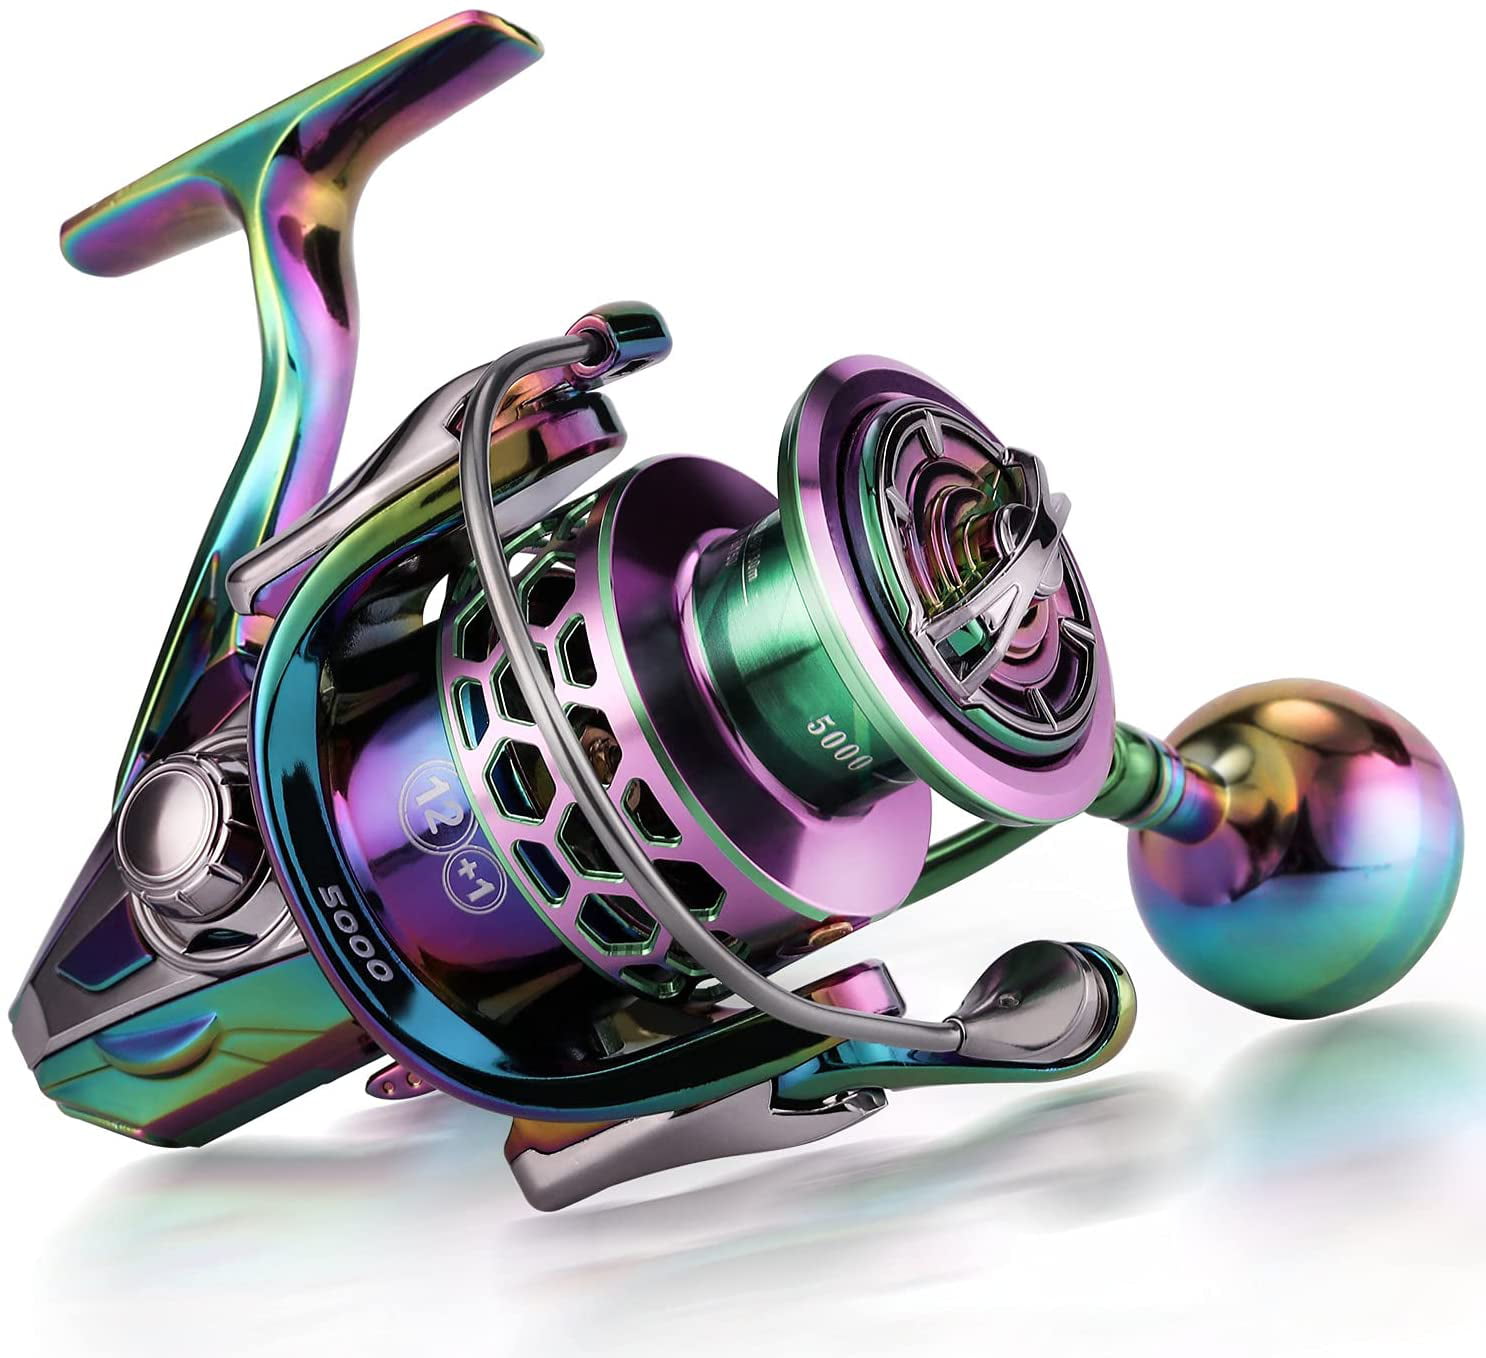 Oversize Aluminum Handle for Saltwater or Freshwater Fishing Sougayilang Fishing Reel 12+1 Stainless BB Colorful Aluminum Frame Spinning Reels with 